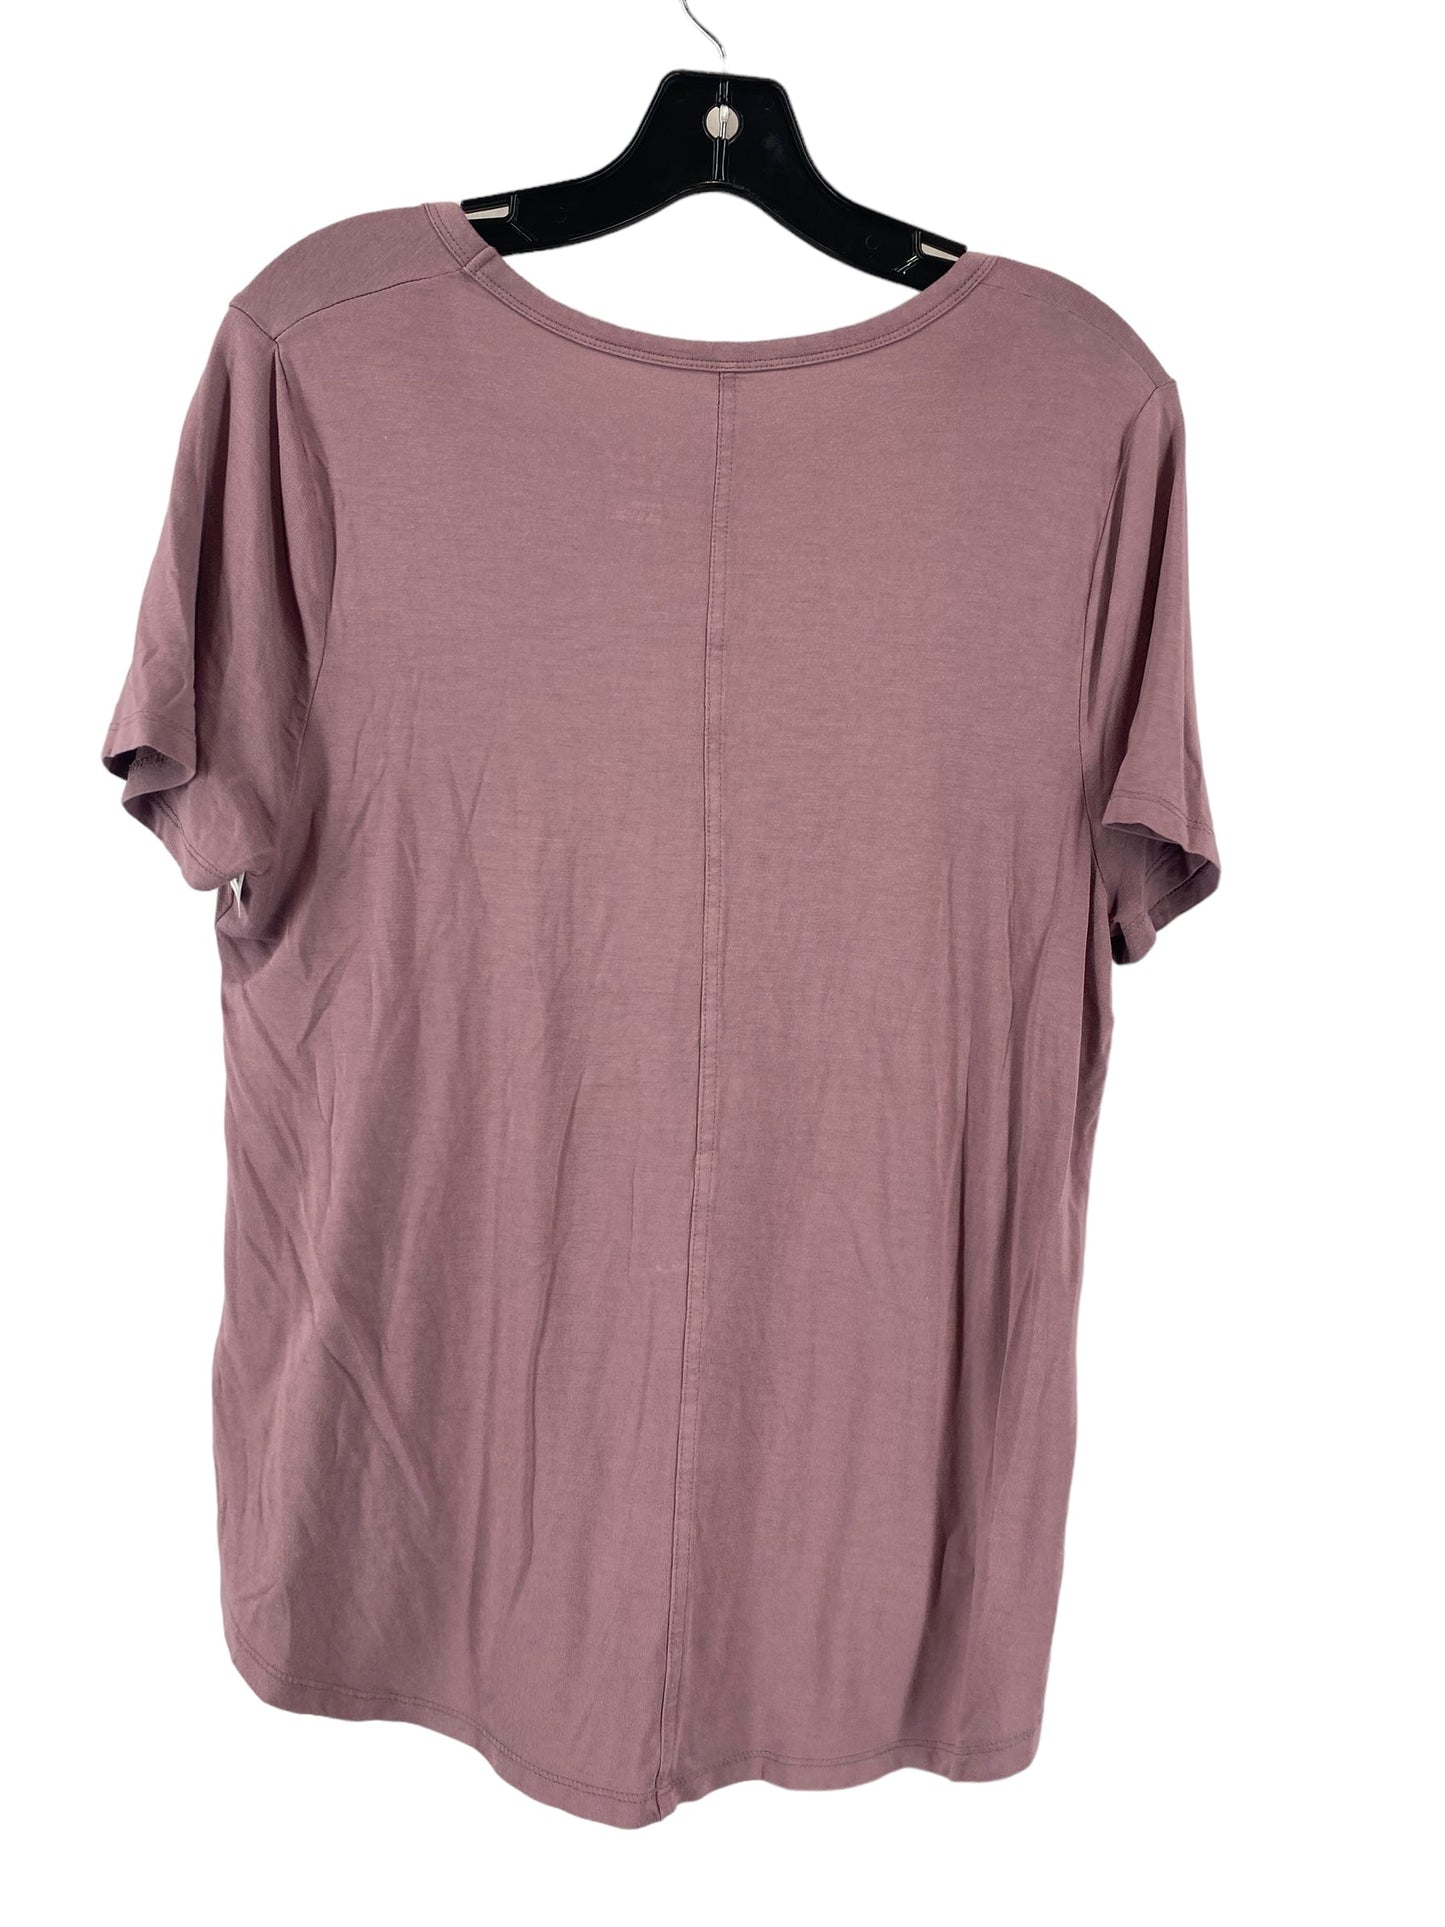 Mauve Top Short Sleeve A New Day, Size M